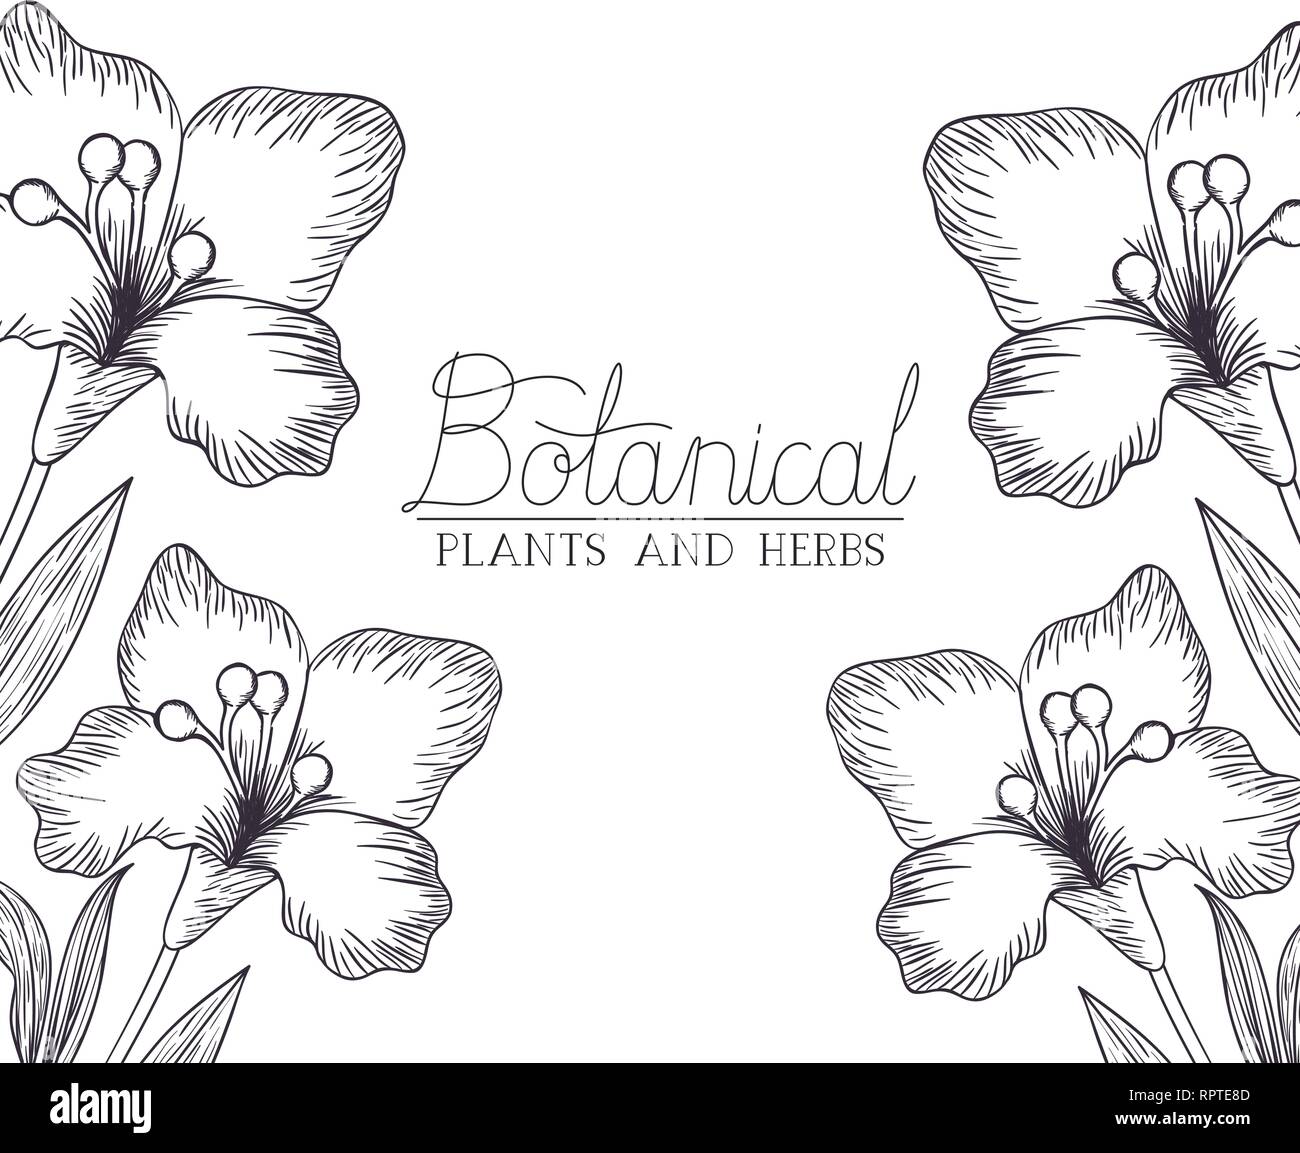 botanical plants and herbs label Stock Vector